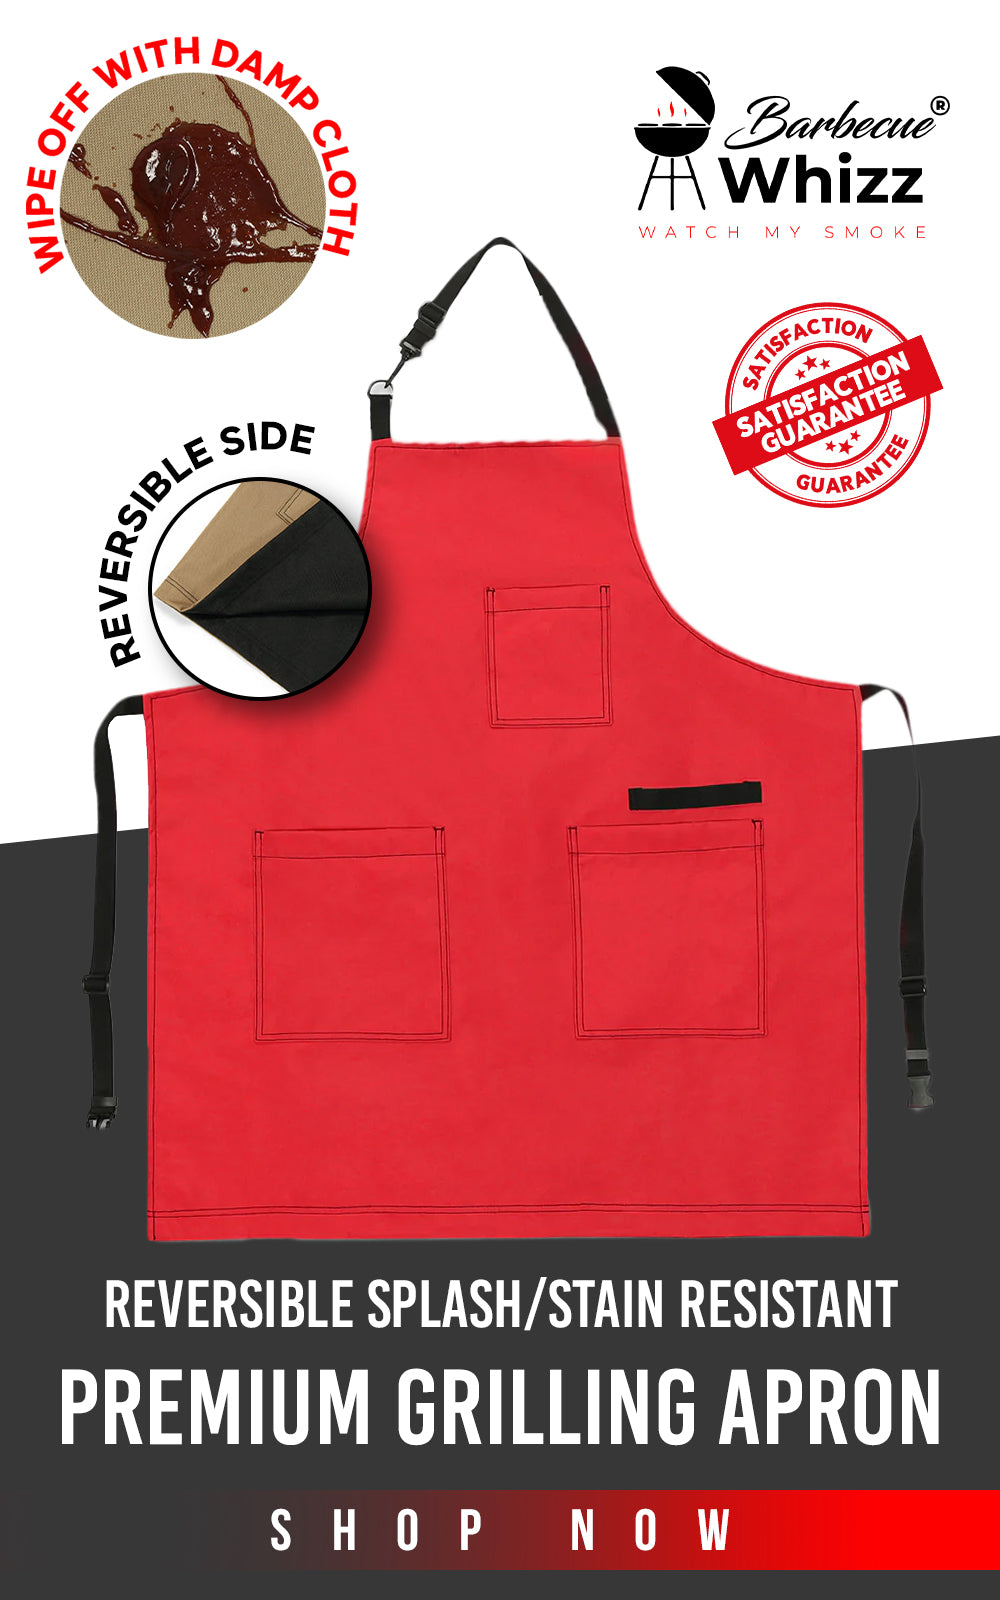 Reversible Splash Stain Grilling Aprons - Barbecue Whizz - Barbecue Whizz...Watch My Smoke